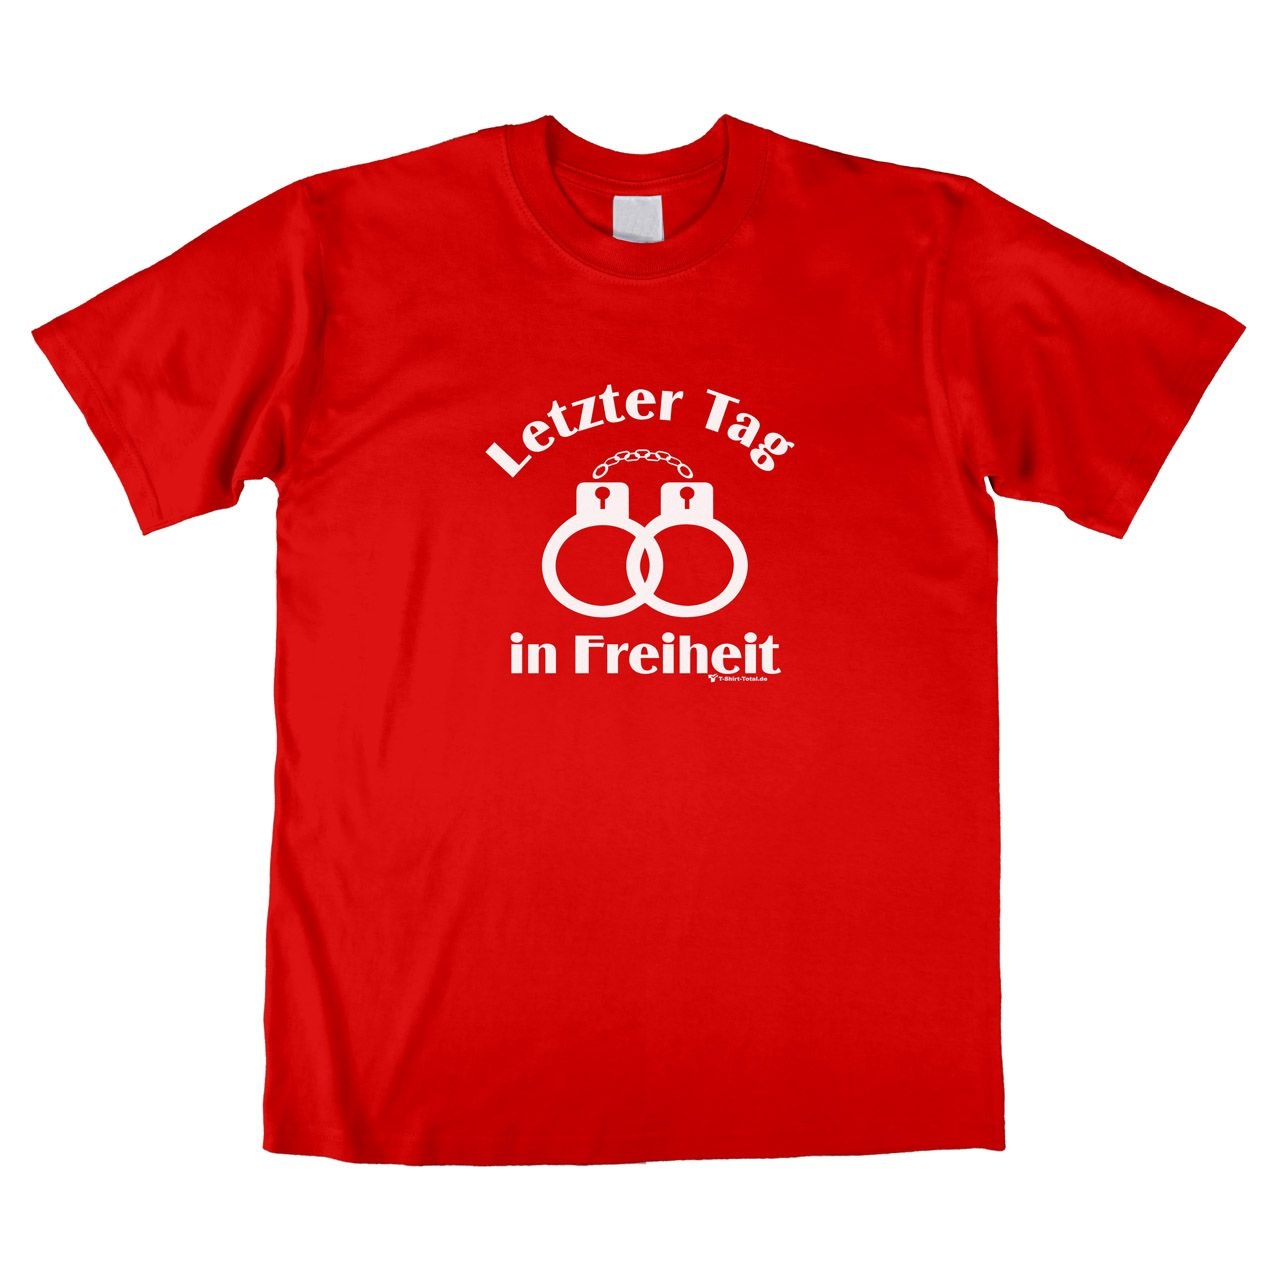 Letzter Tag in Freiheit Unisex T-Shirt rot Extra Large